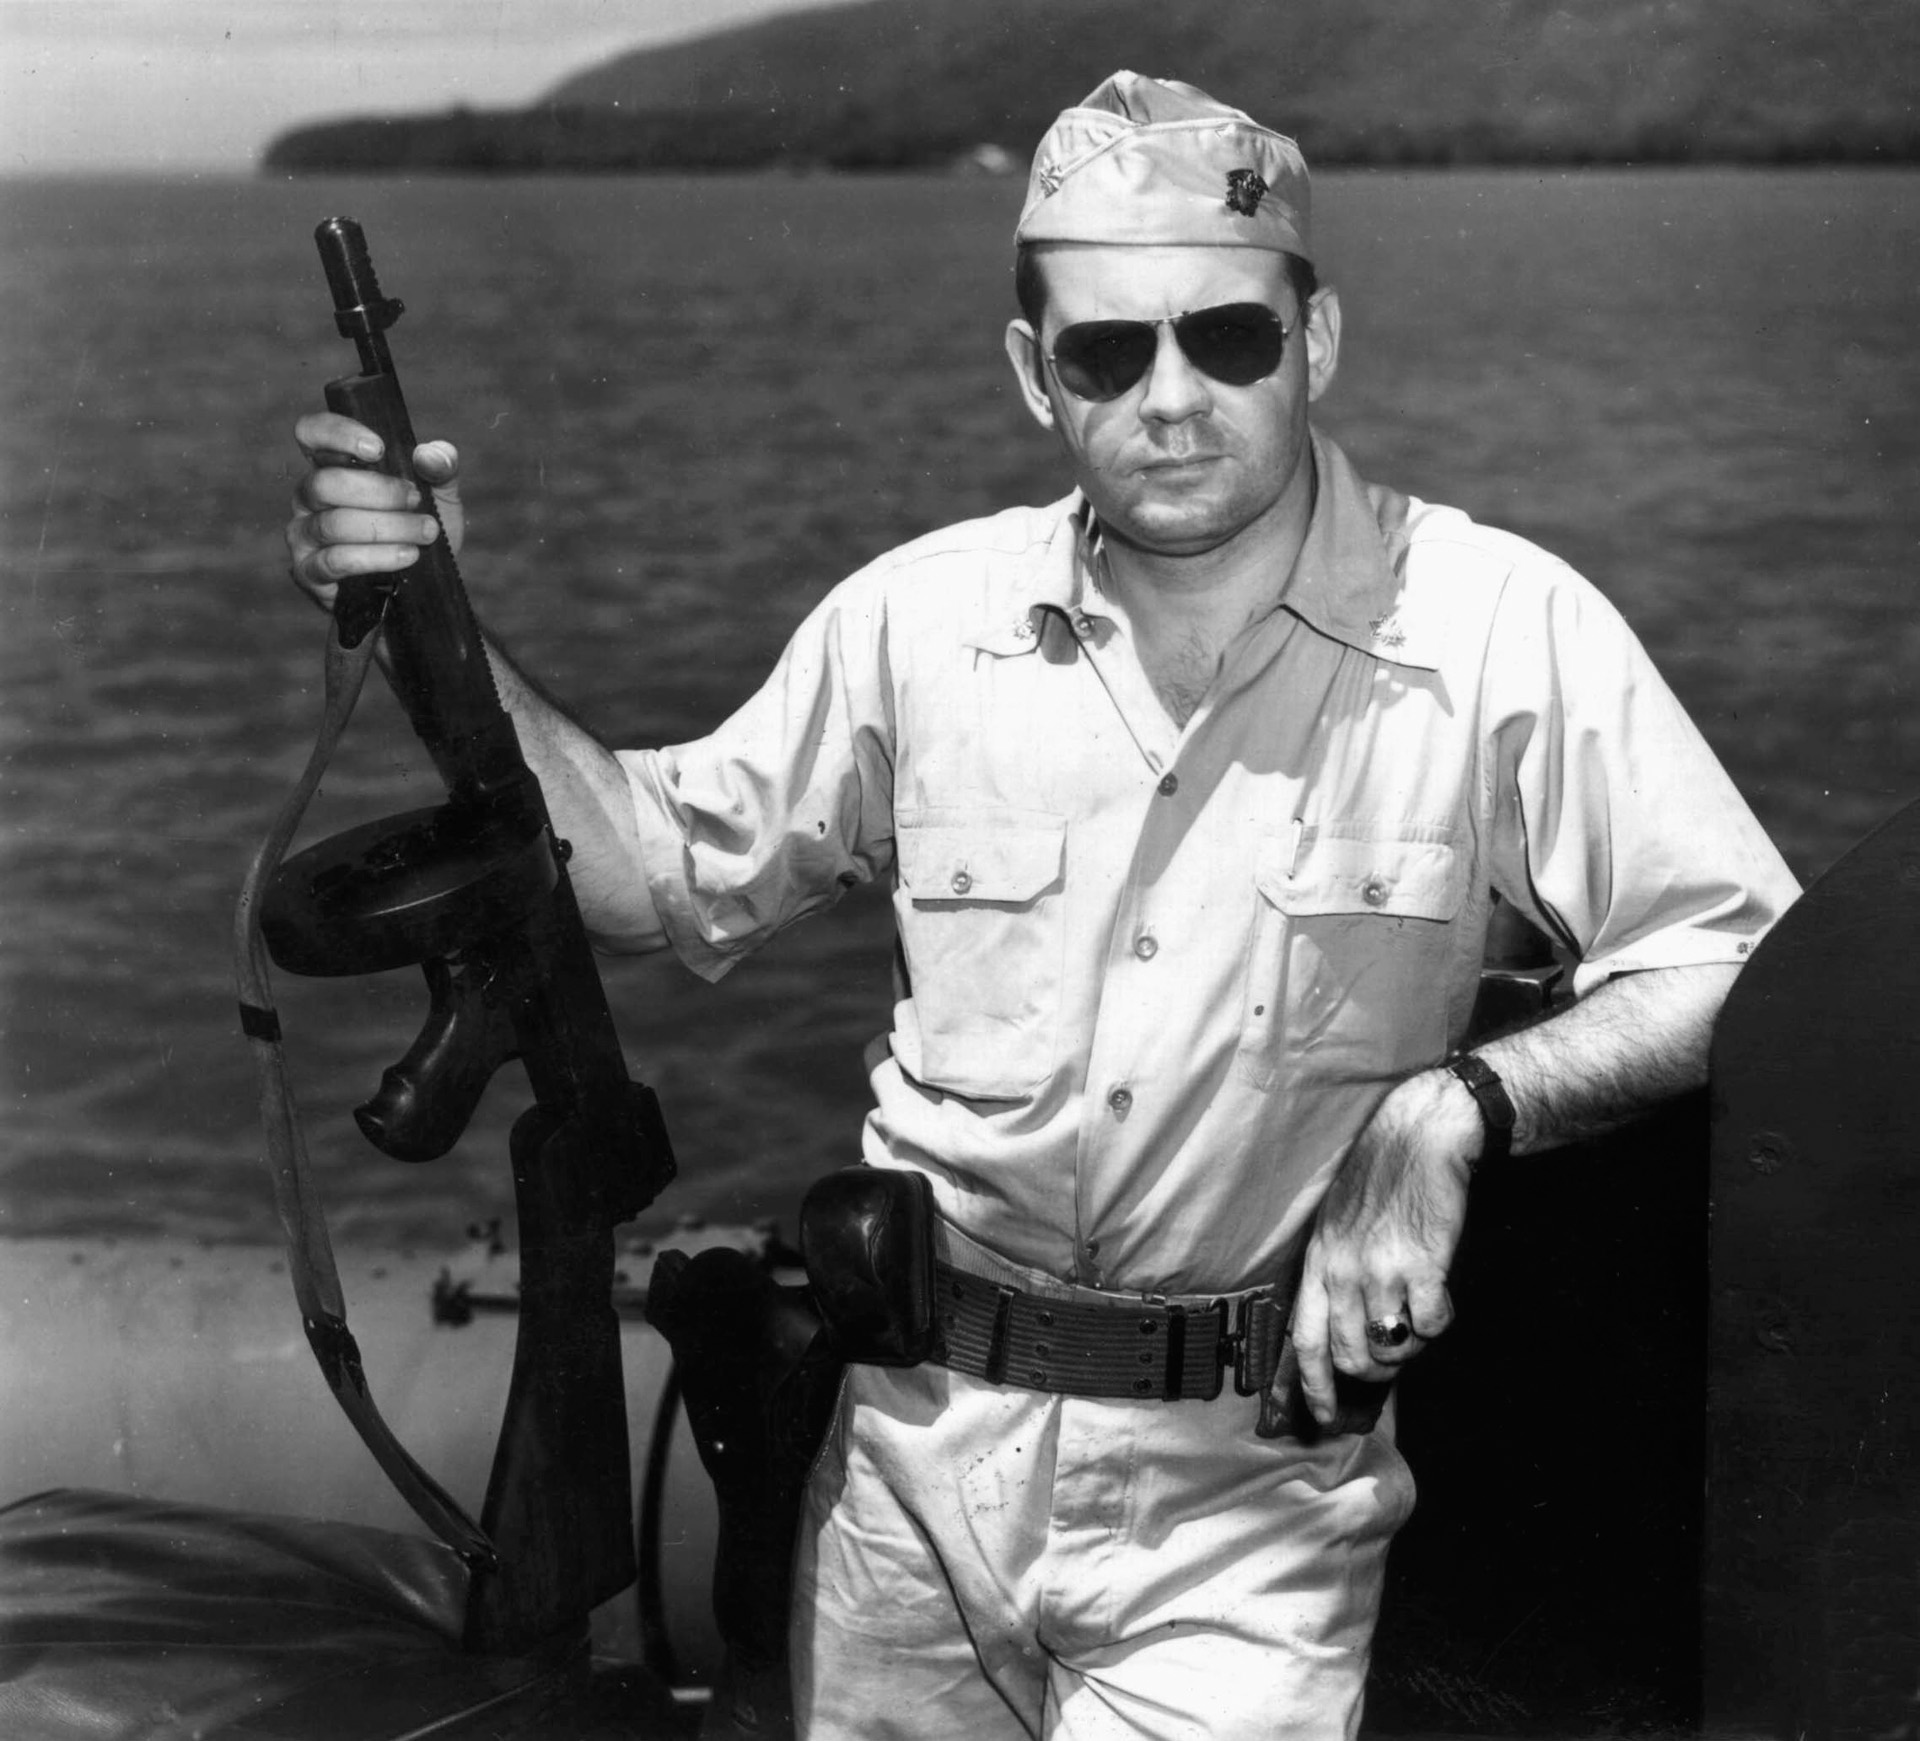 Intrepid PT boat commander John D. Bulkeley poses for the camera with an automatic weapon in hand. Bulkeley’s exploits in the Philippines would become the stuff of legend.